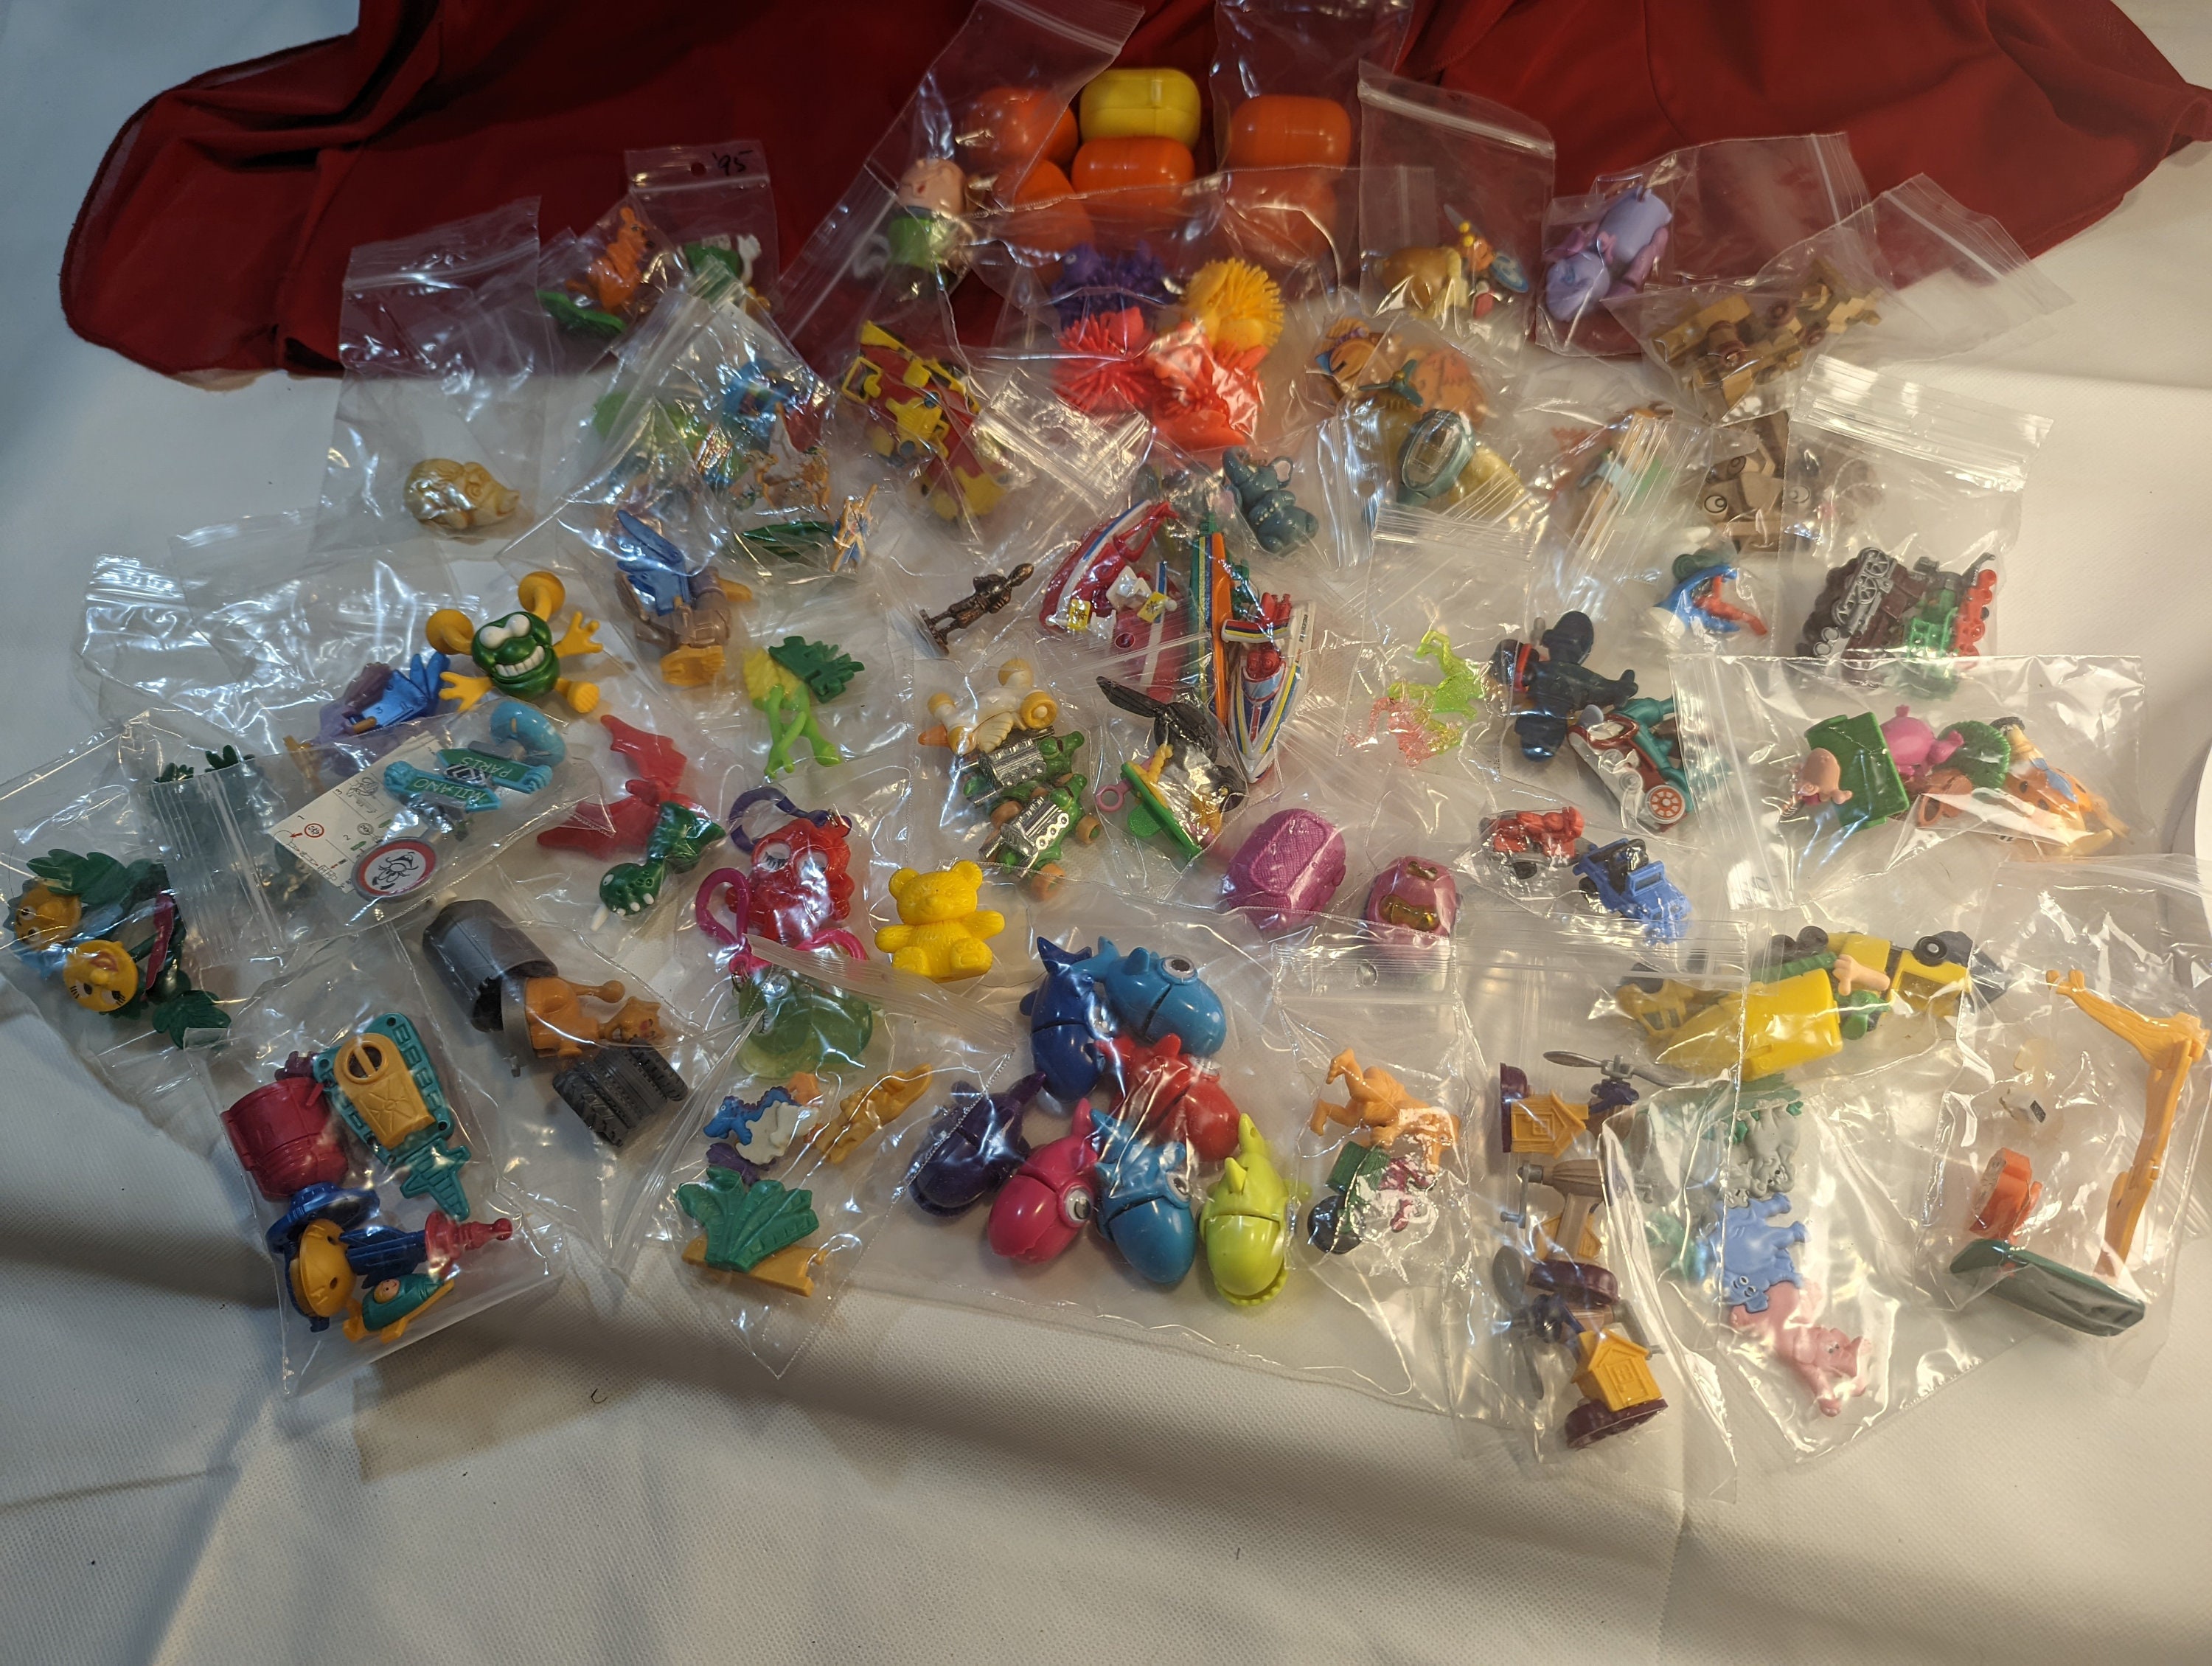 Kinder Surprise Plastic Toys and Wood Toy Collection 89 Pieces - Etsy